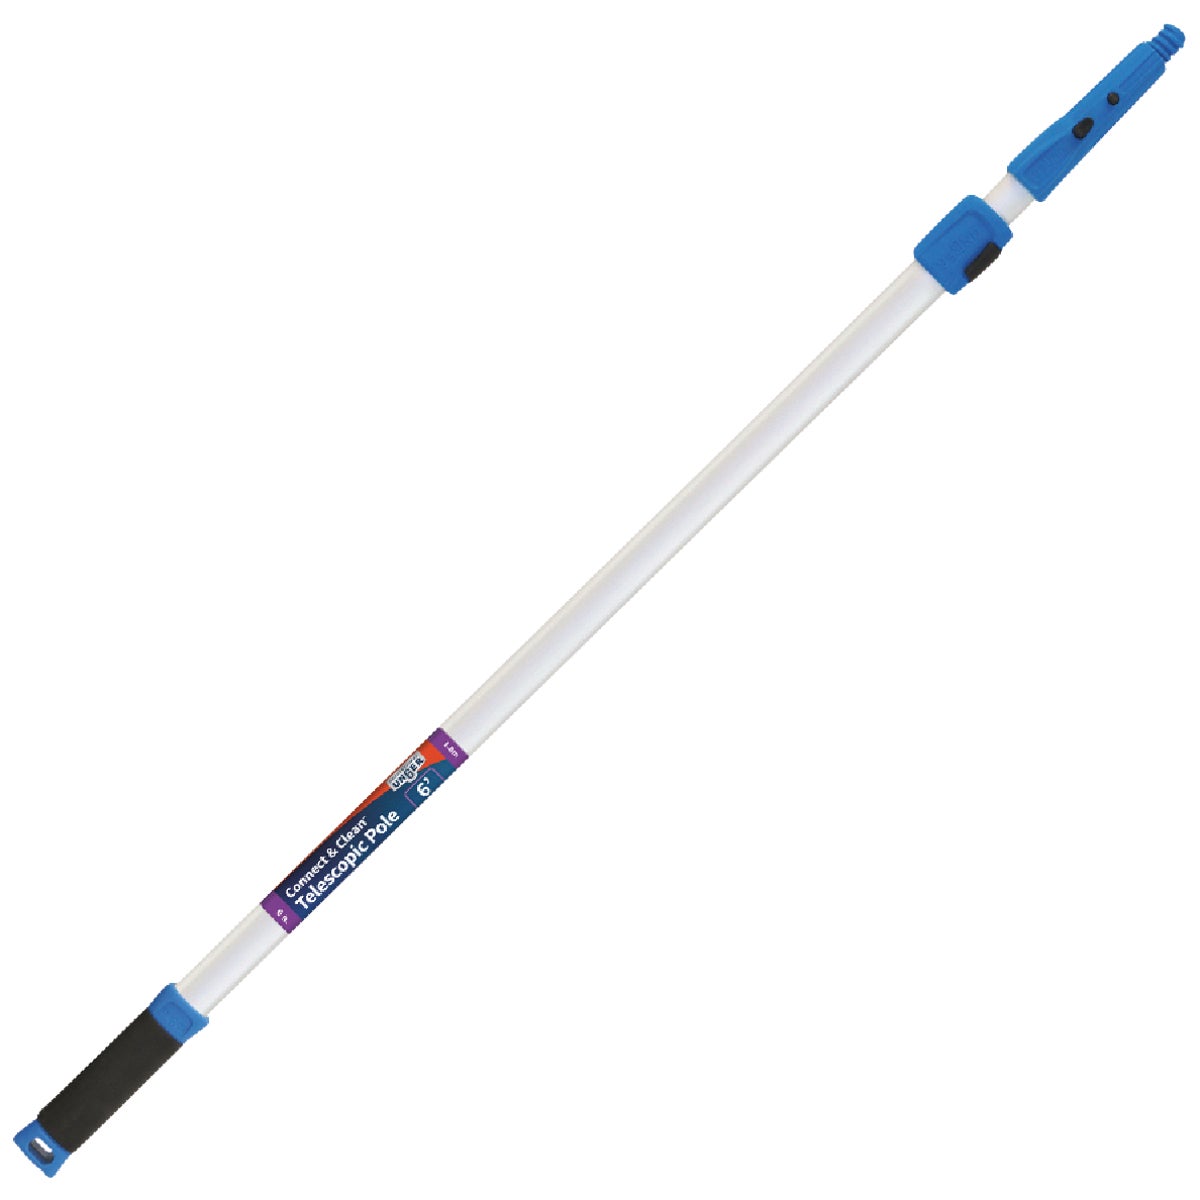 Unger Connect & Clean Professional 6 Ft. Aluminum Telescopic Pole with Locking Cone and Quick-Flip Clamps